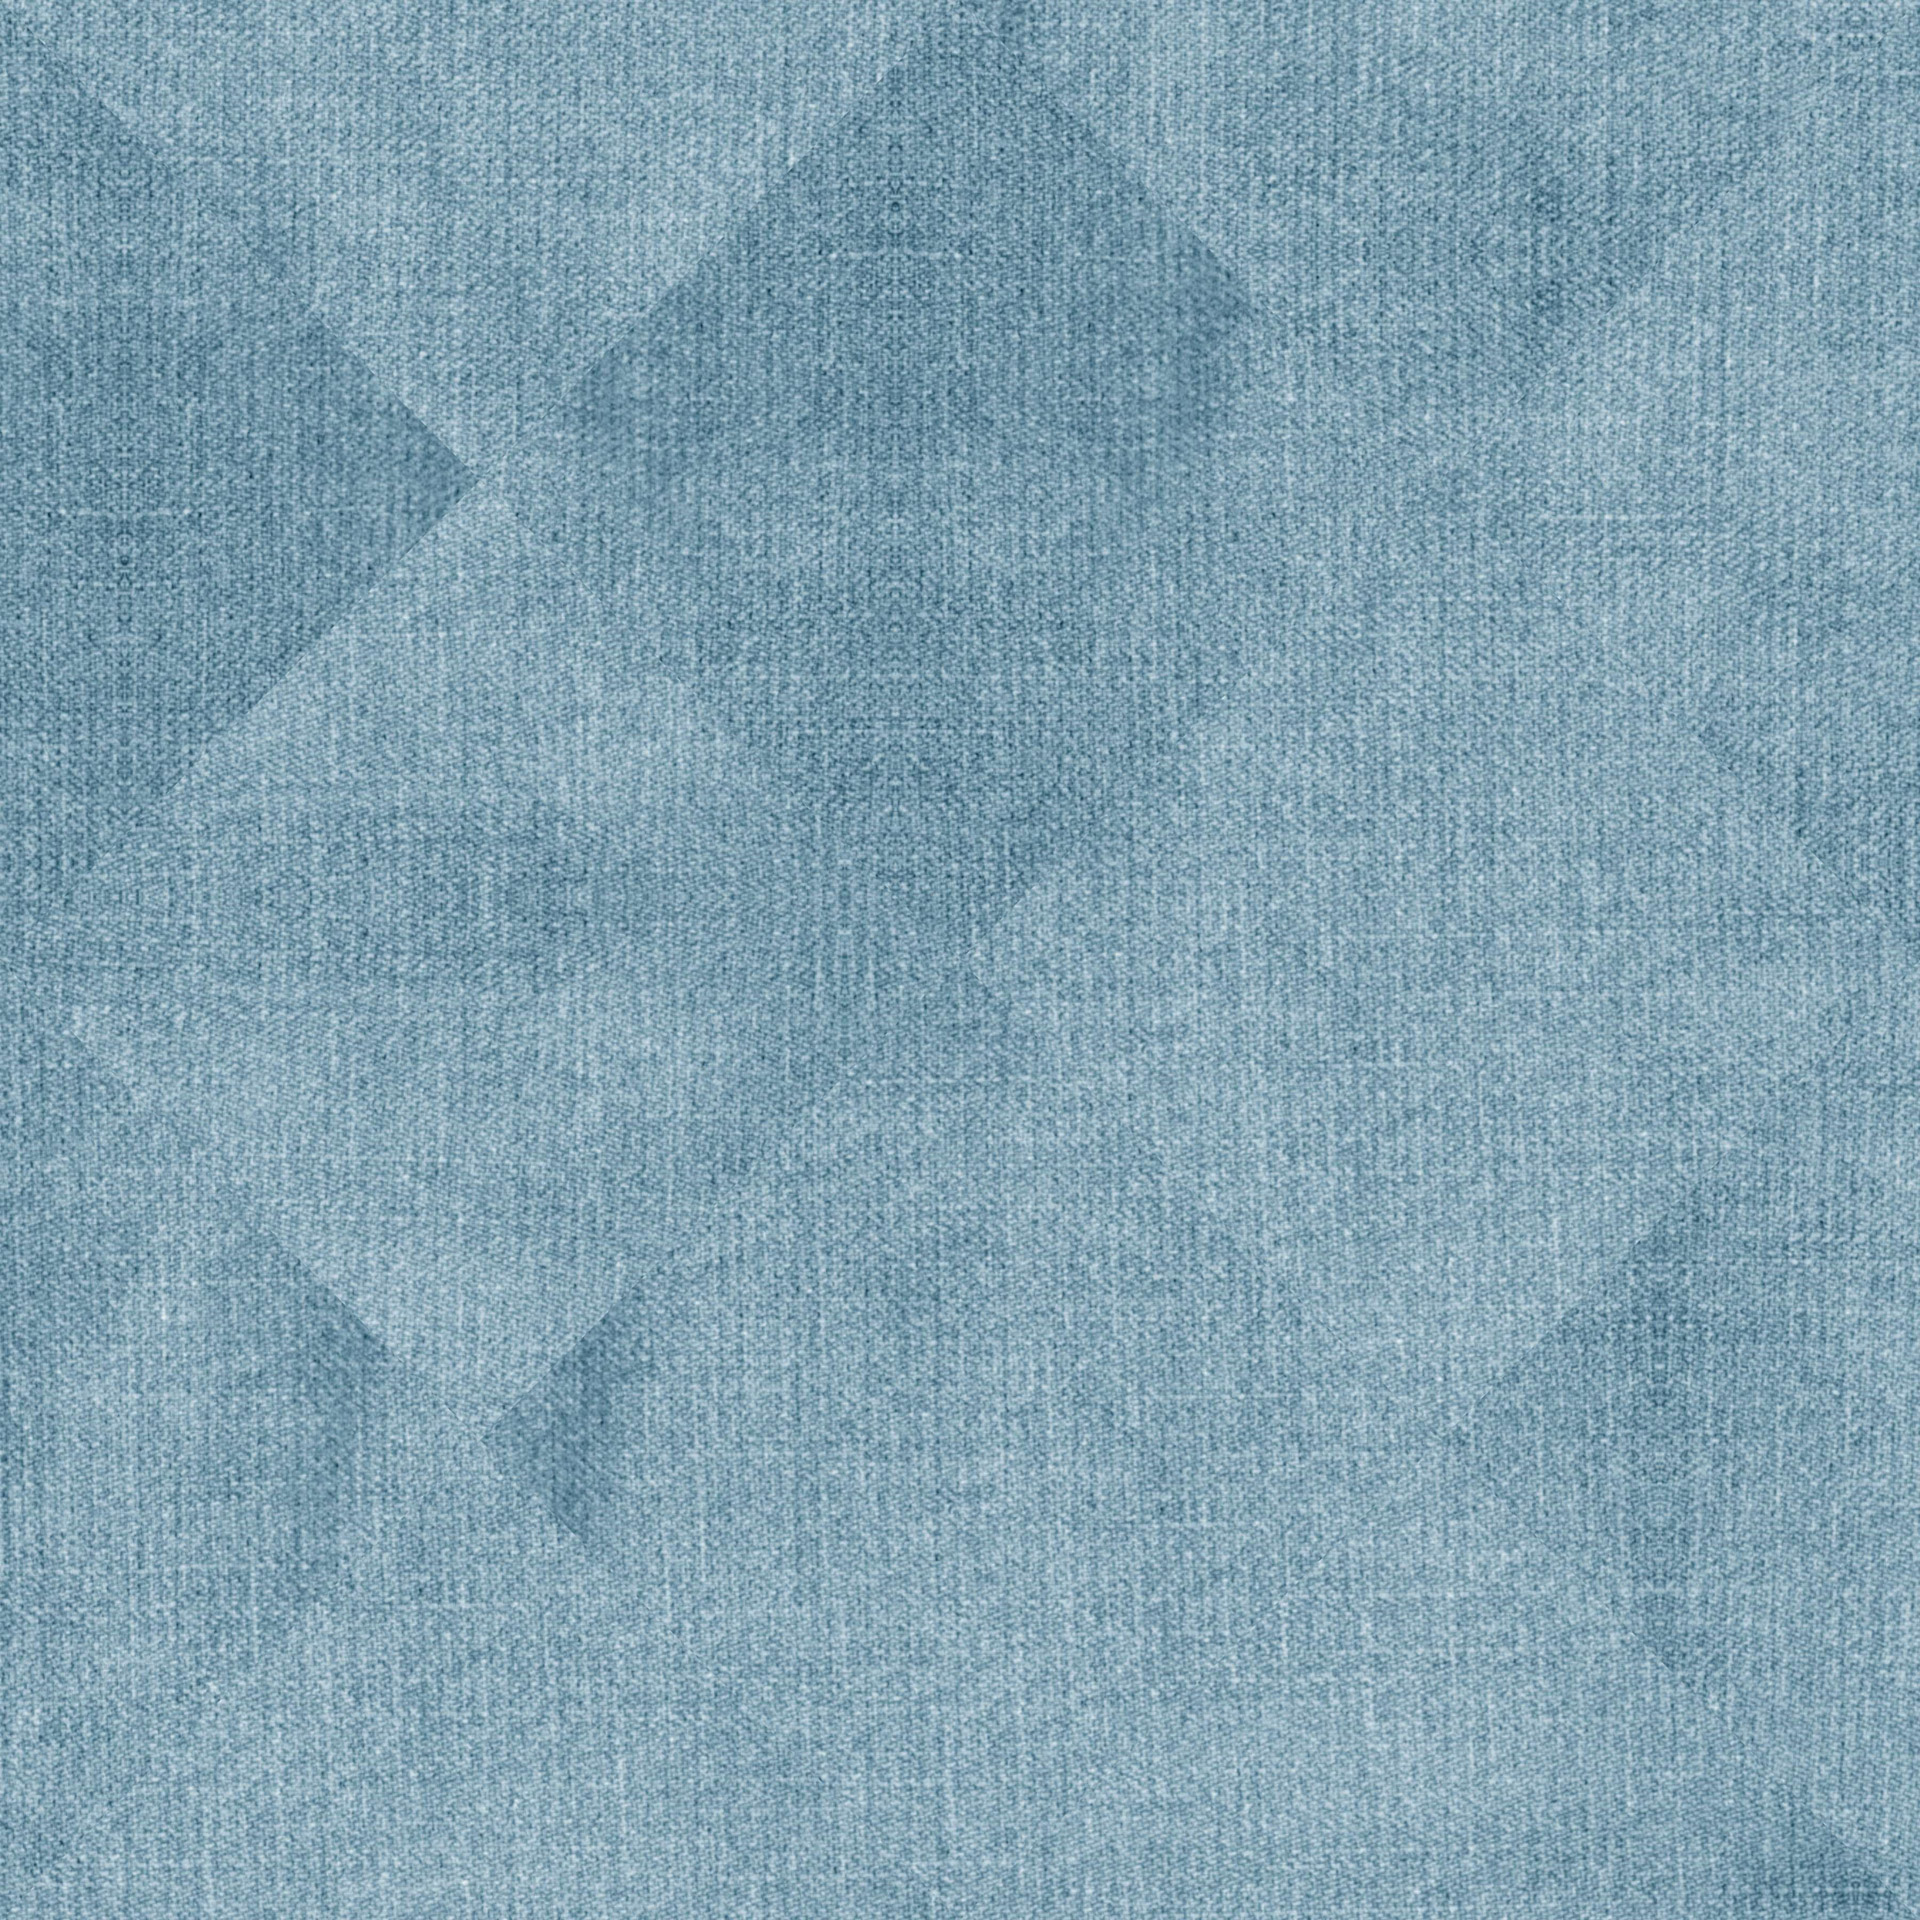 background blue jeans blue fabric free photo